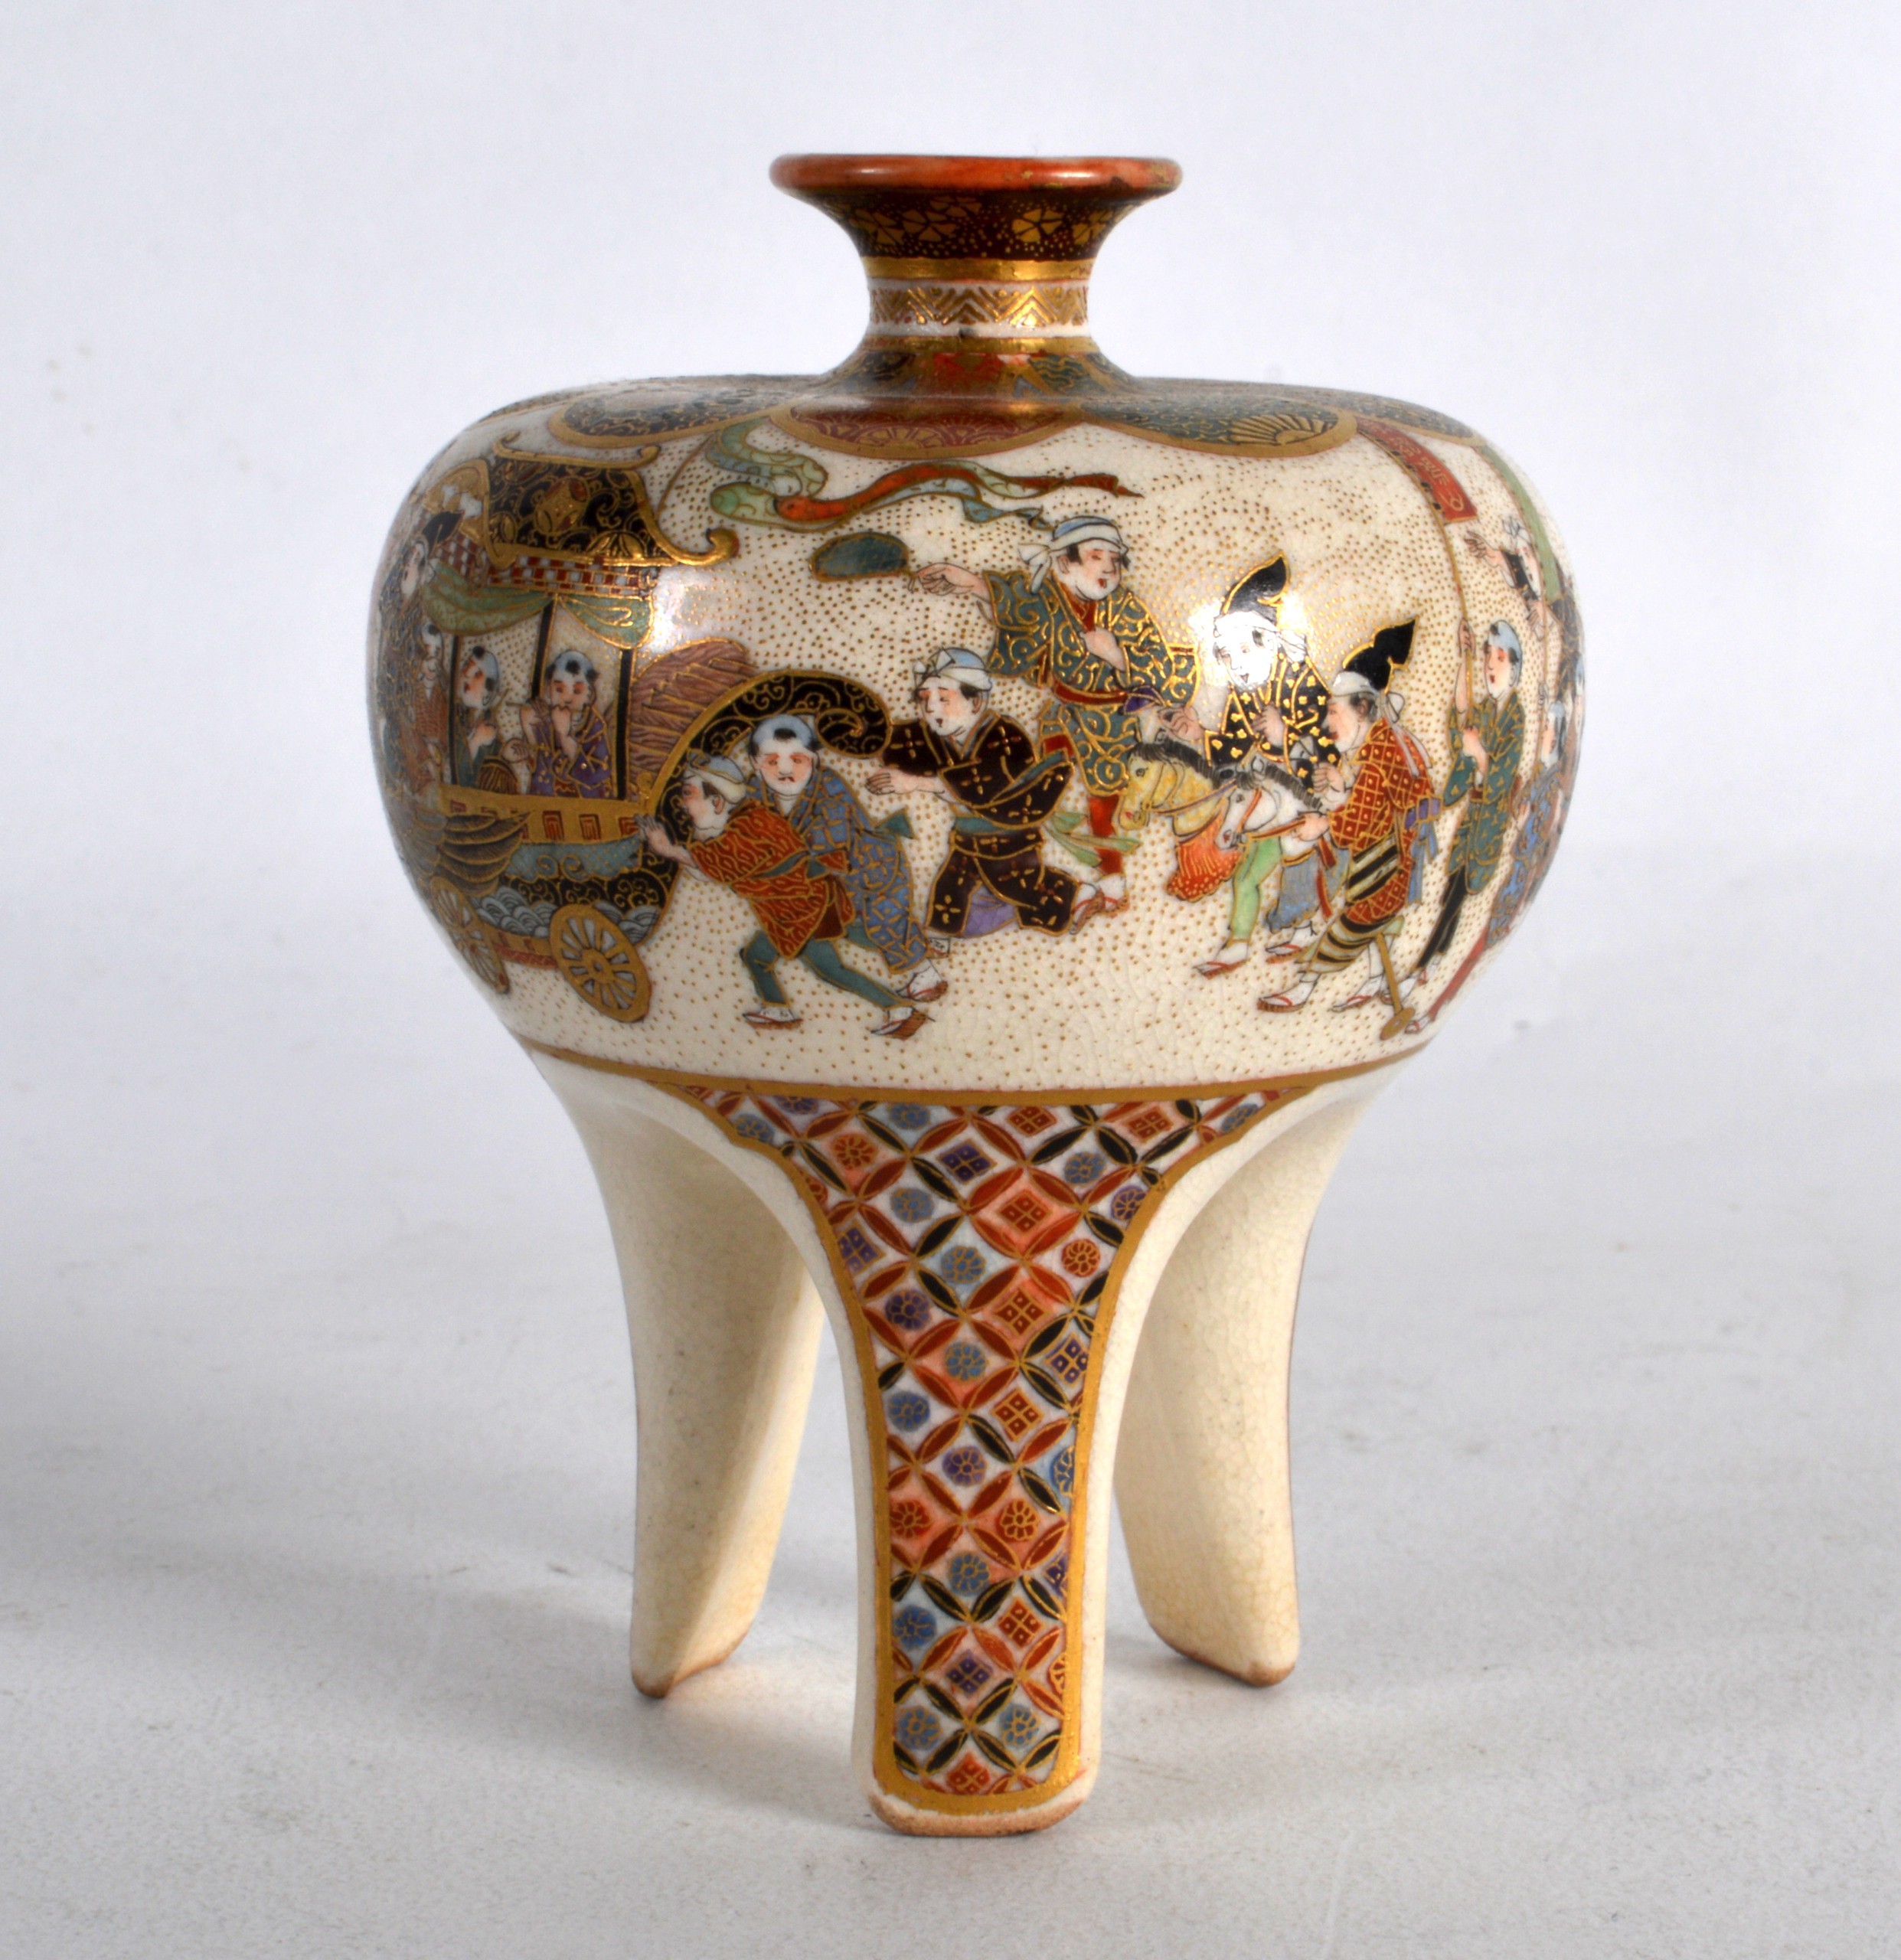 A GOOD SMALL LATE 19TH CENTURY JAPANESE MEIJI PERIOD SATSUMA VASE of bulbous form, upon slender legs